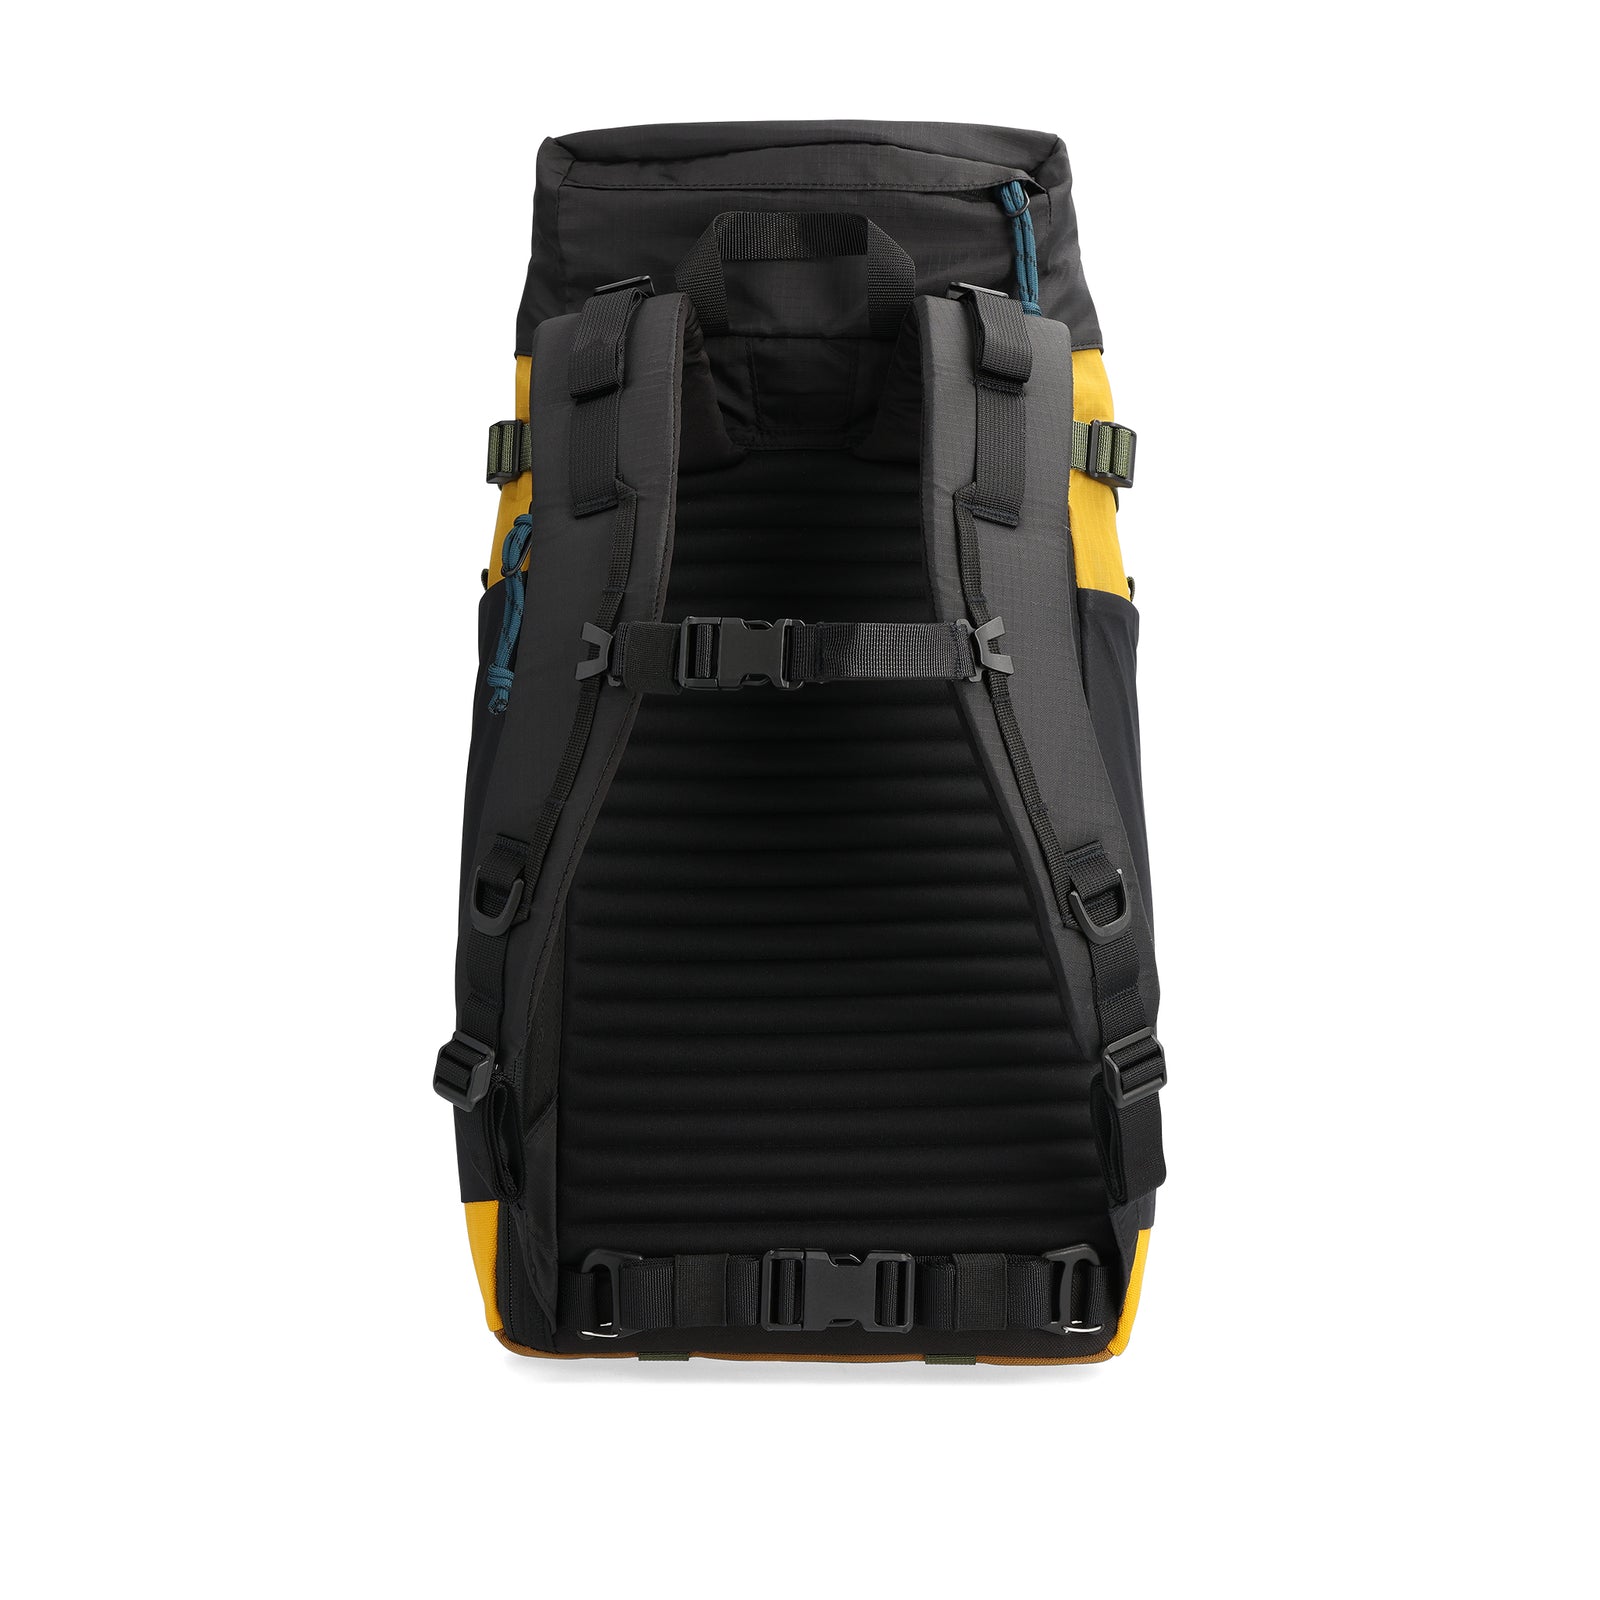 Back View of Topo Designs Mountain Pack 16L 2.0 in "Mustard / Black"